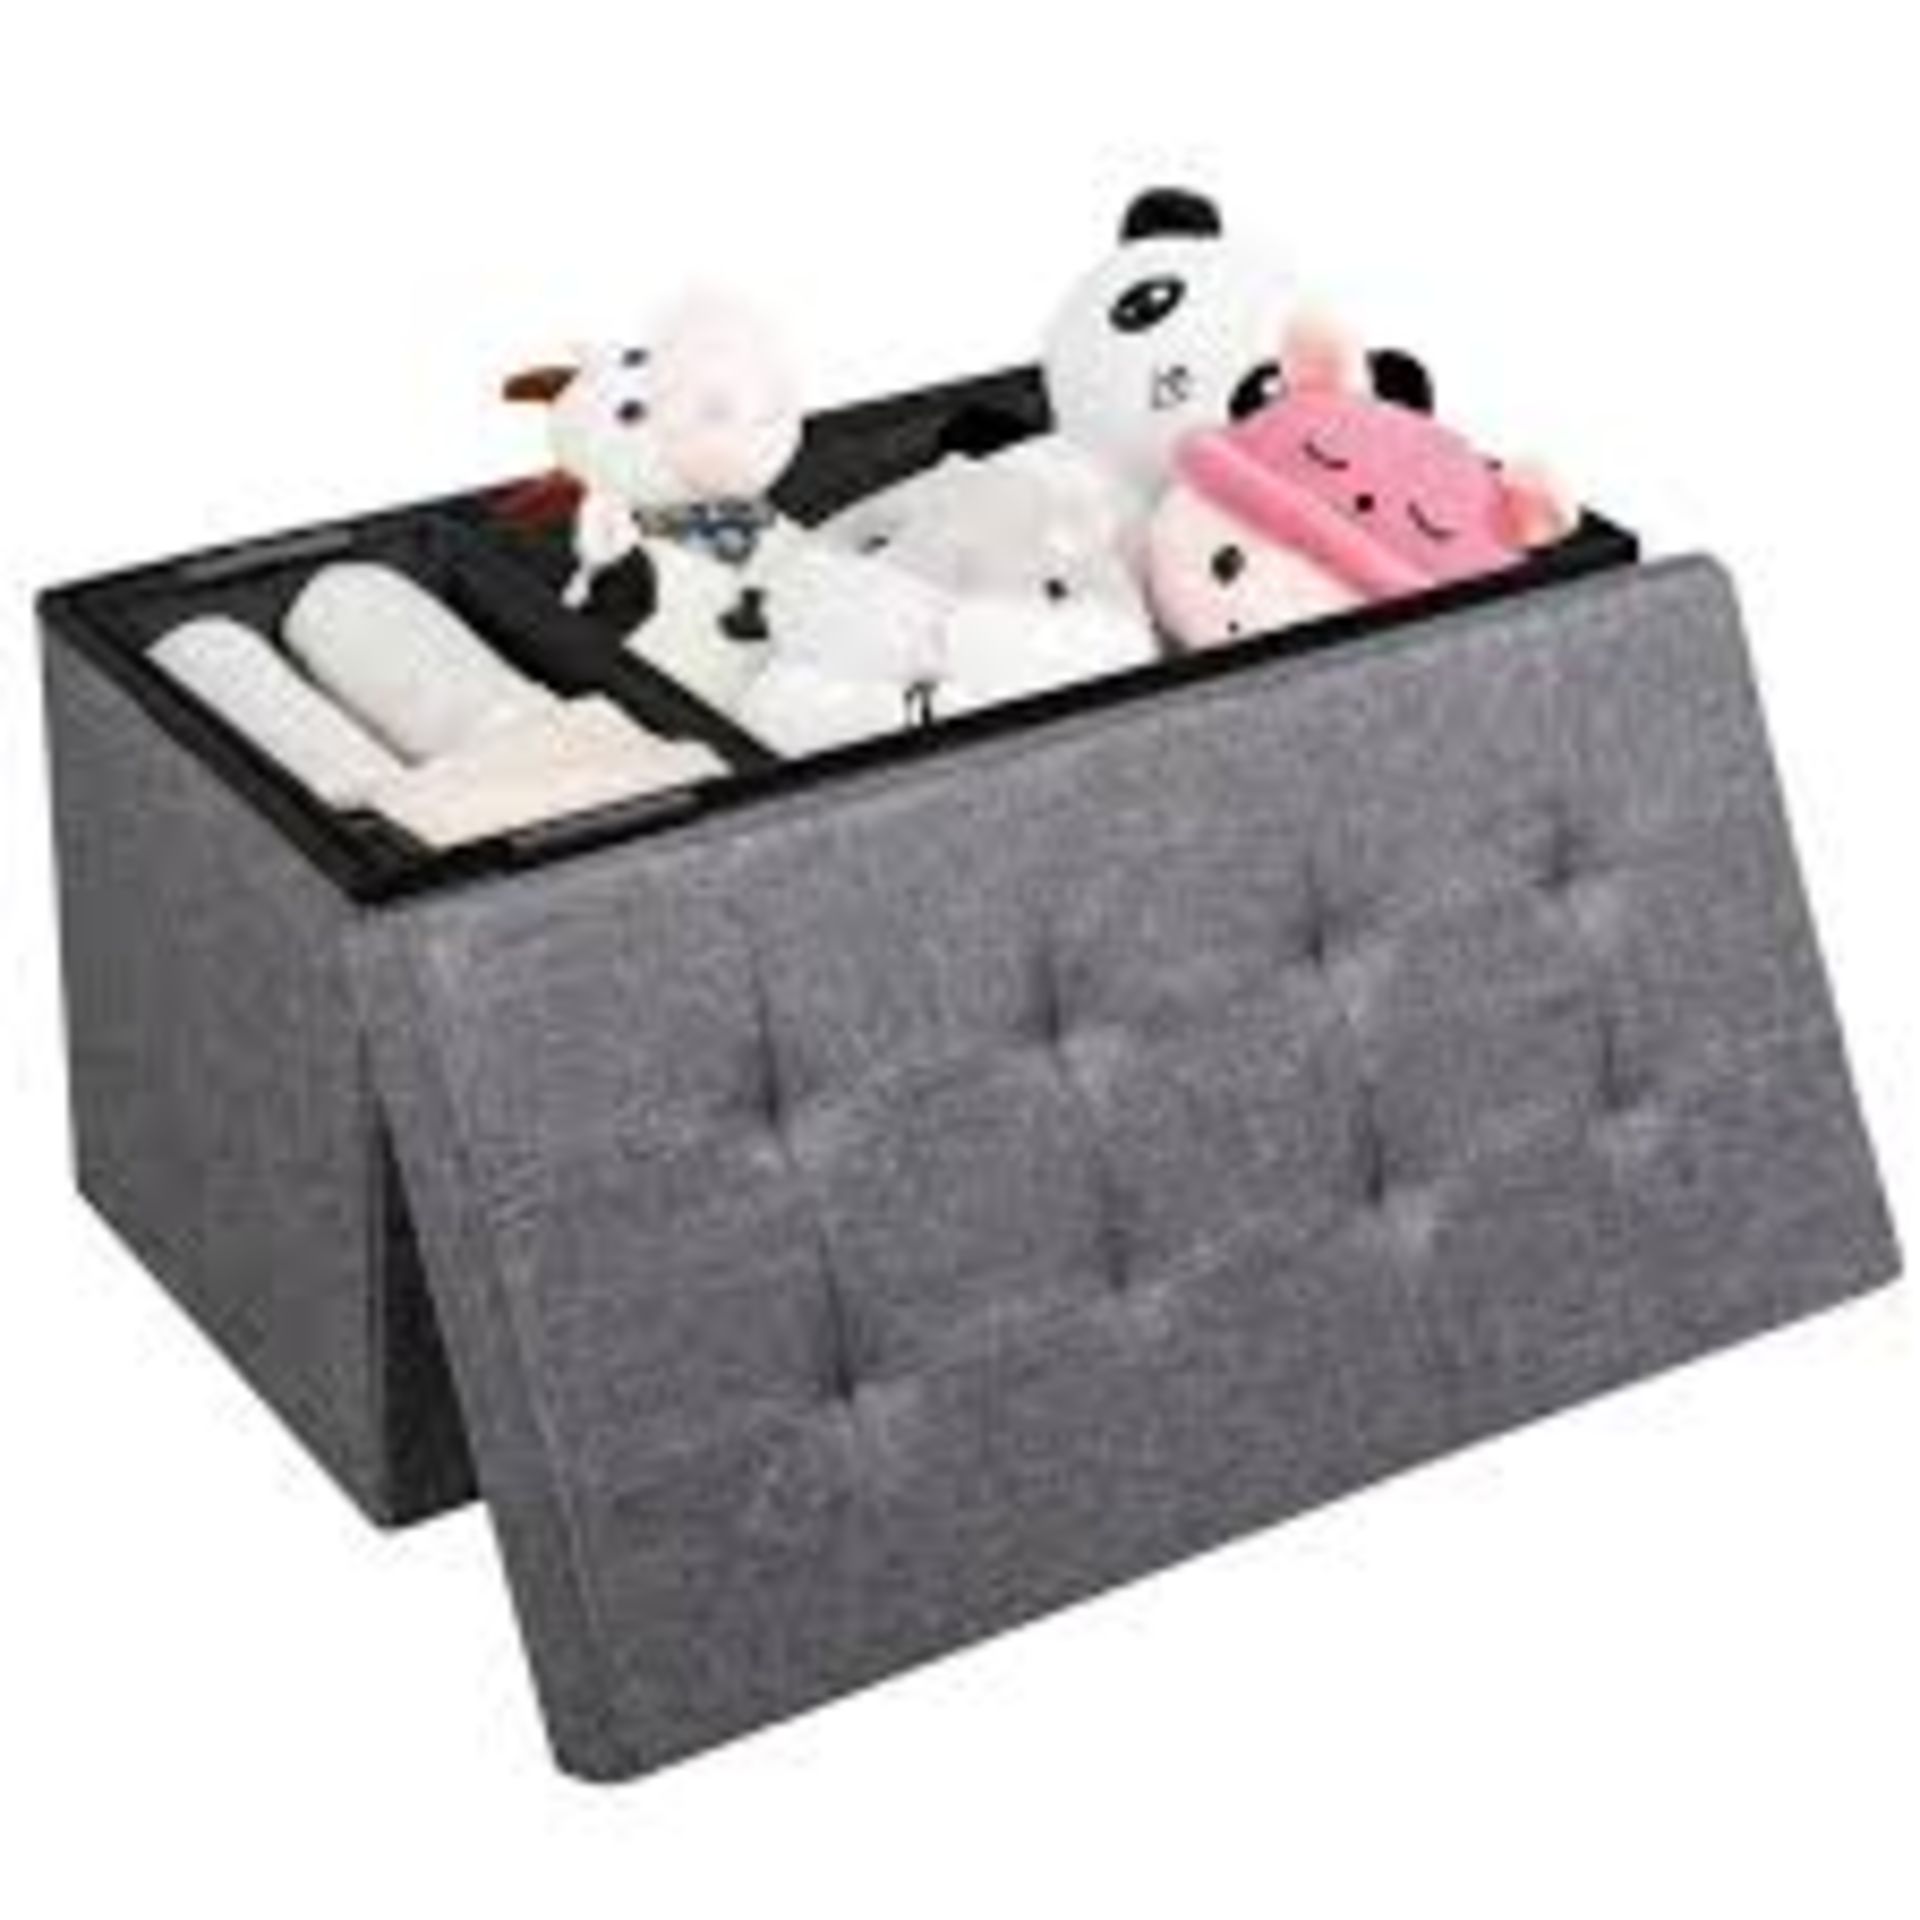 Fabric Foldable Storage Ottoman with Padded Seat for Living Room. - R14.15. Combining elegant